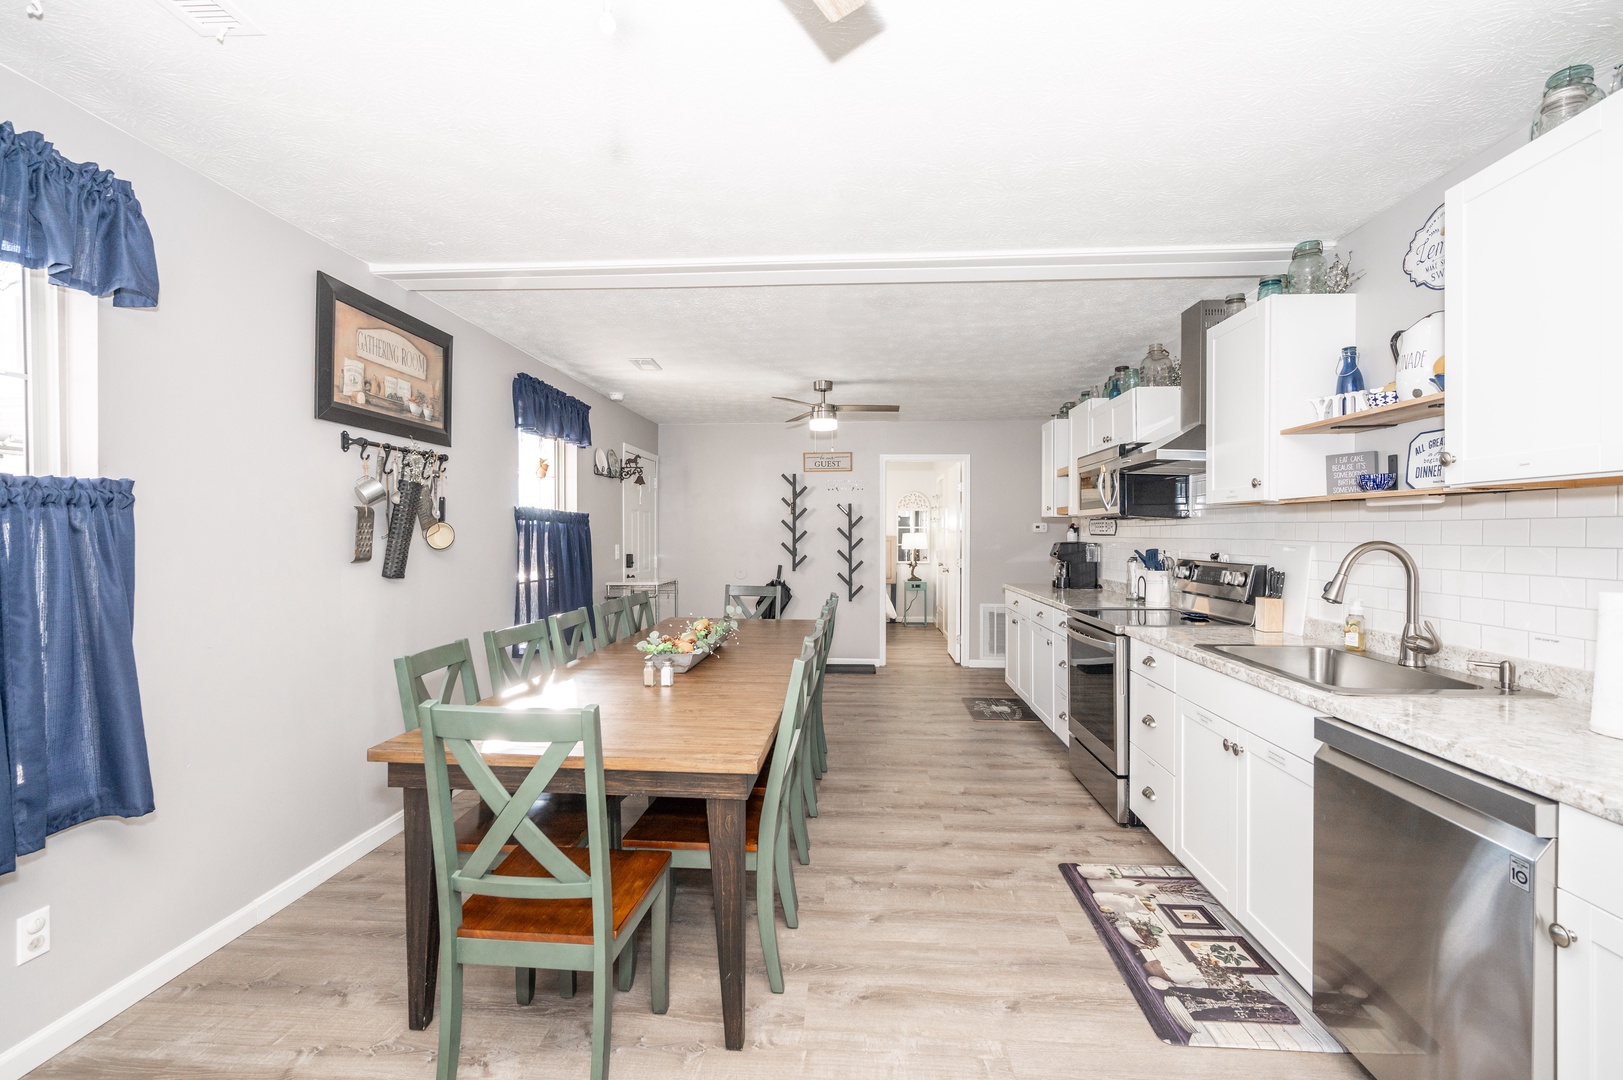 Apartment 3’s expansive eat-in kitchen is sure to be a beloved gathering spot